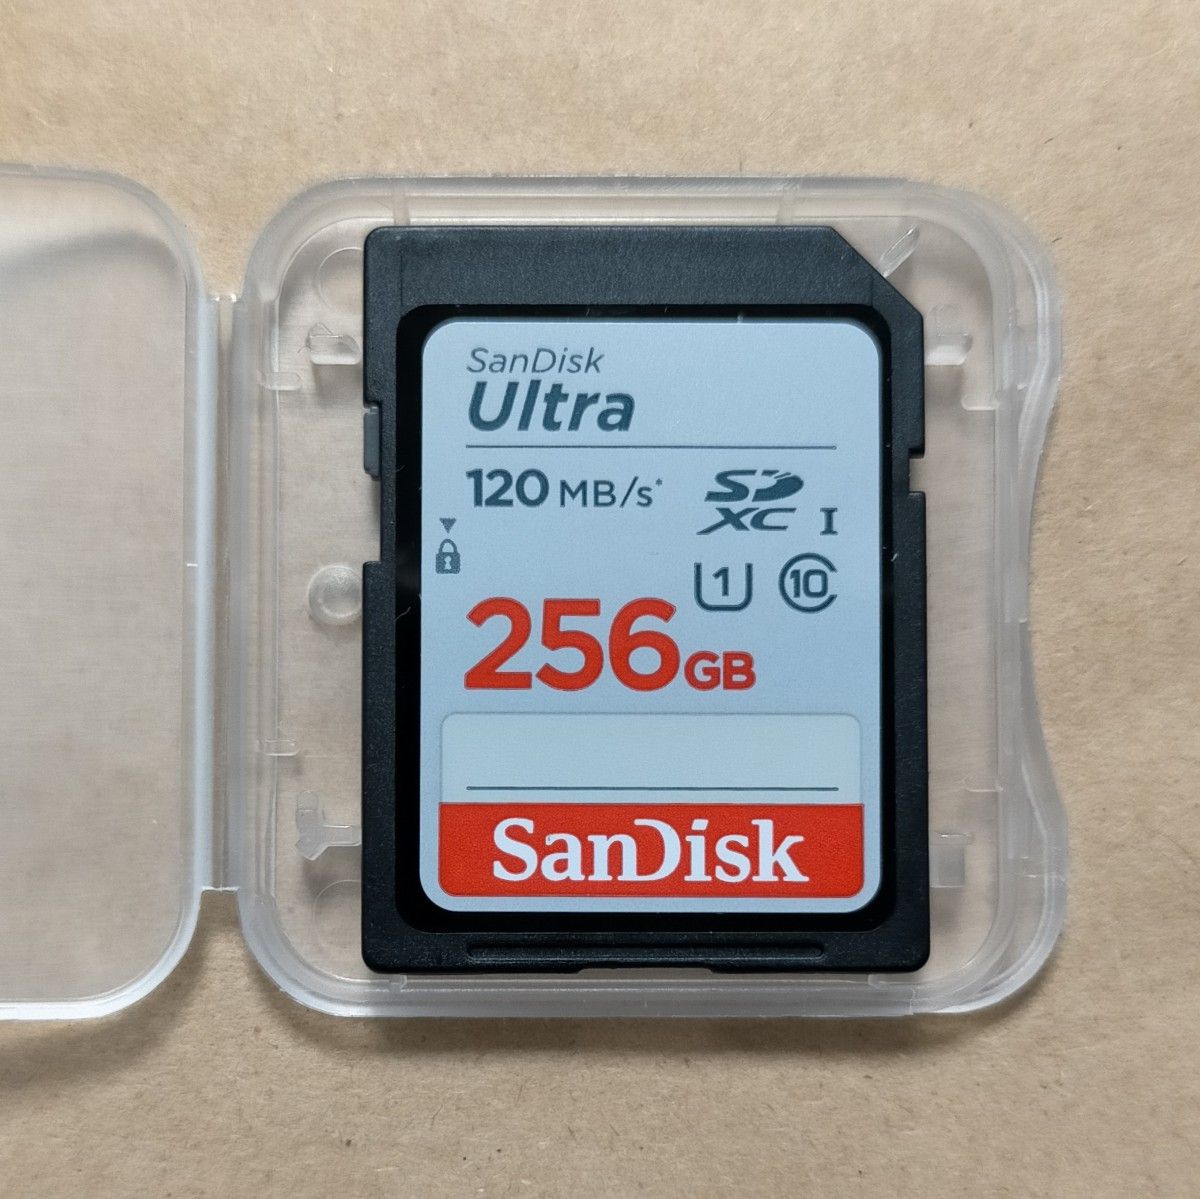 SanDisk ULTRA SDXCカード サンディスク 256GB UHS-I 120MB/s Ver.